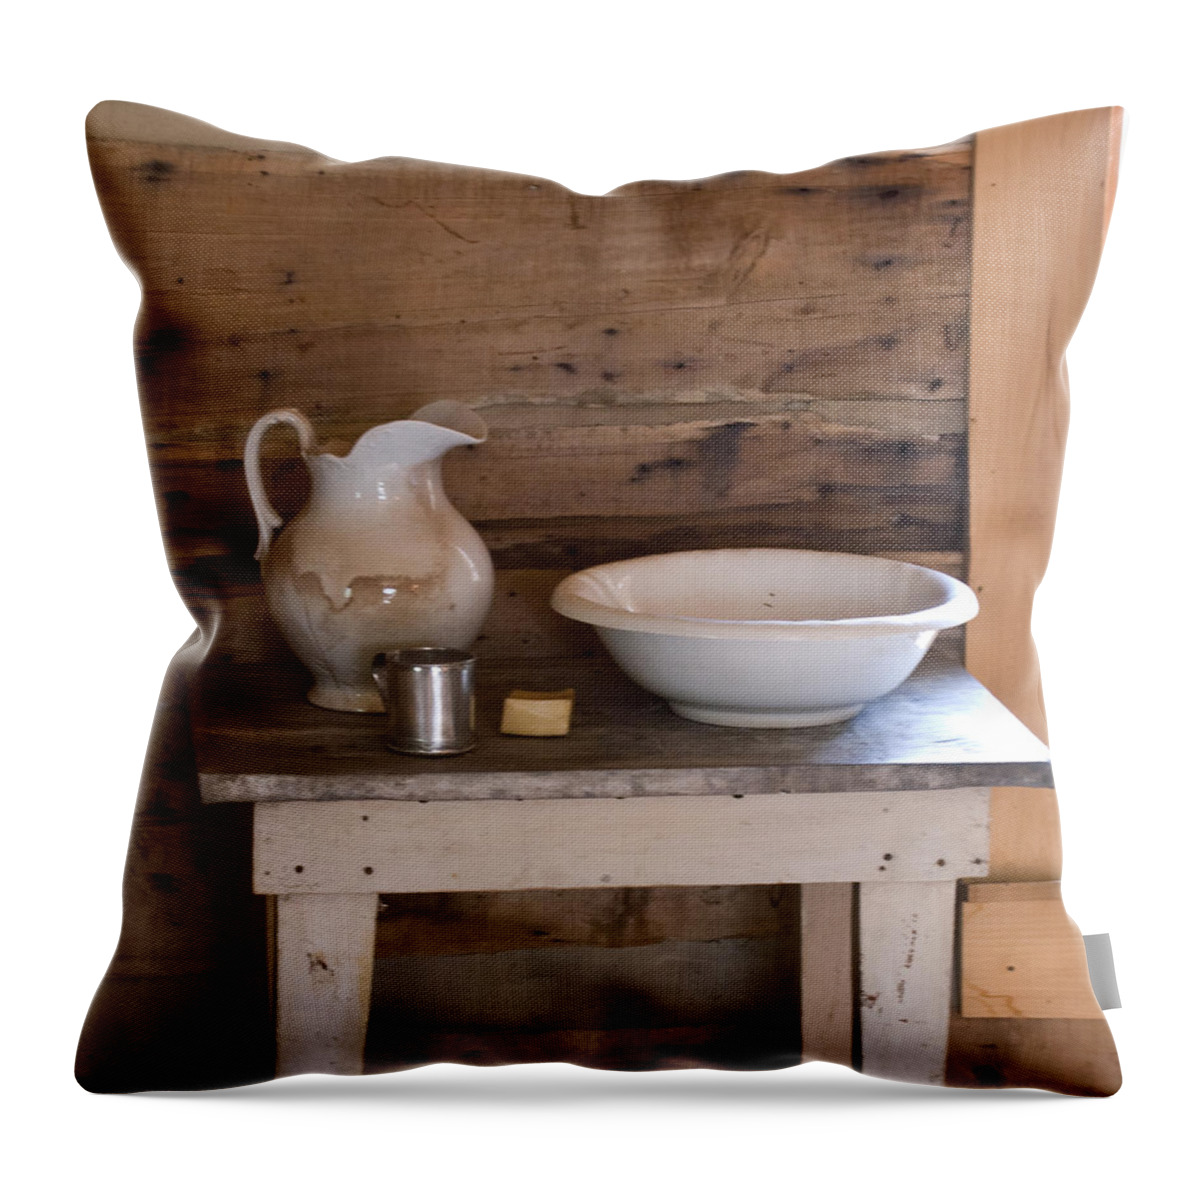 Primative Throw Pillow featuring the photograph Primative Wash Bowl Stand by Douglas Barnett